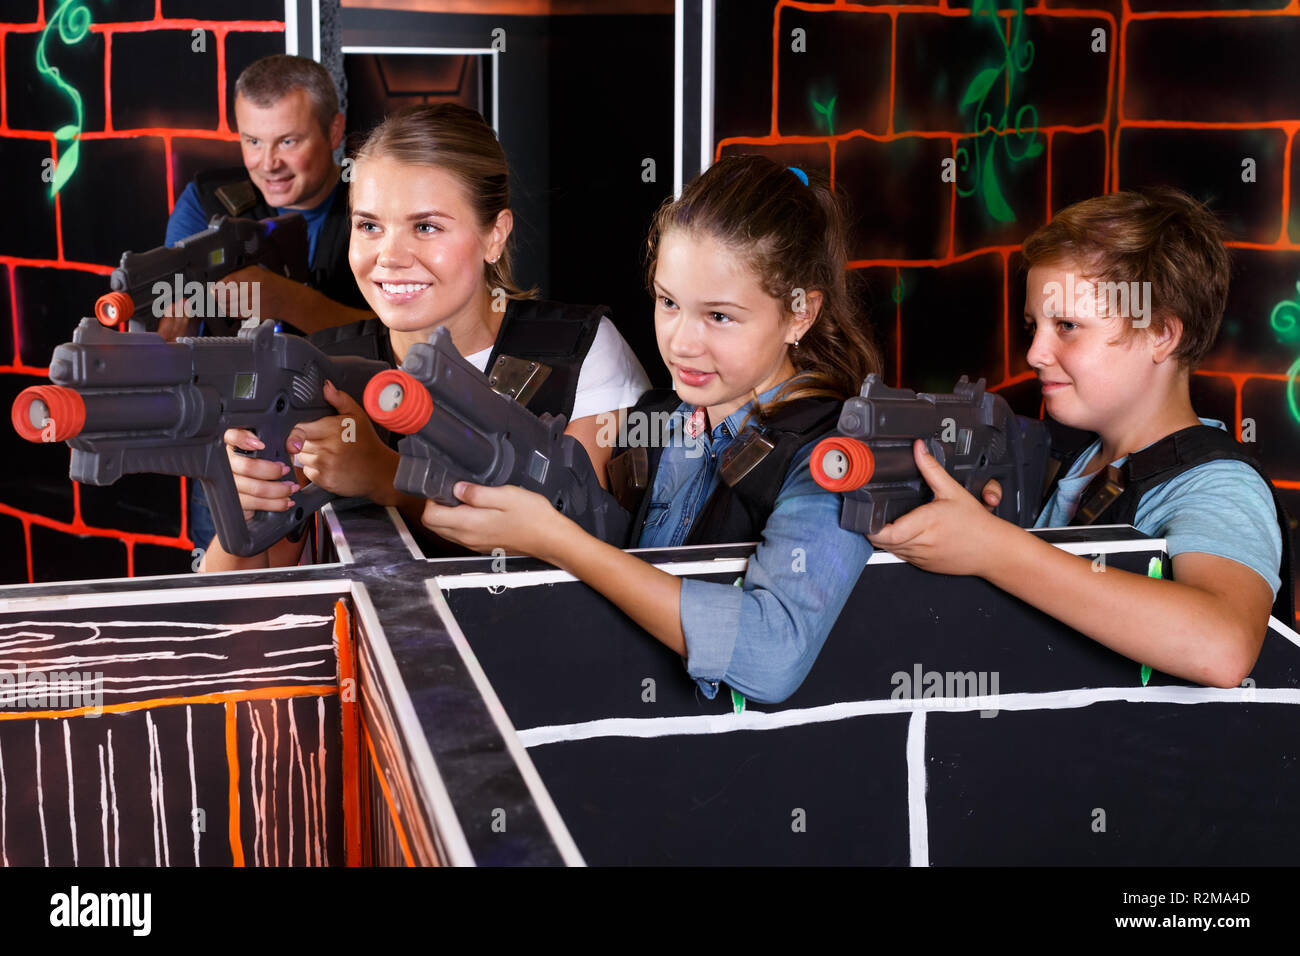 Smiling boy and girls aiming laser guns and playing laser tag game